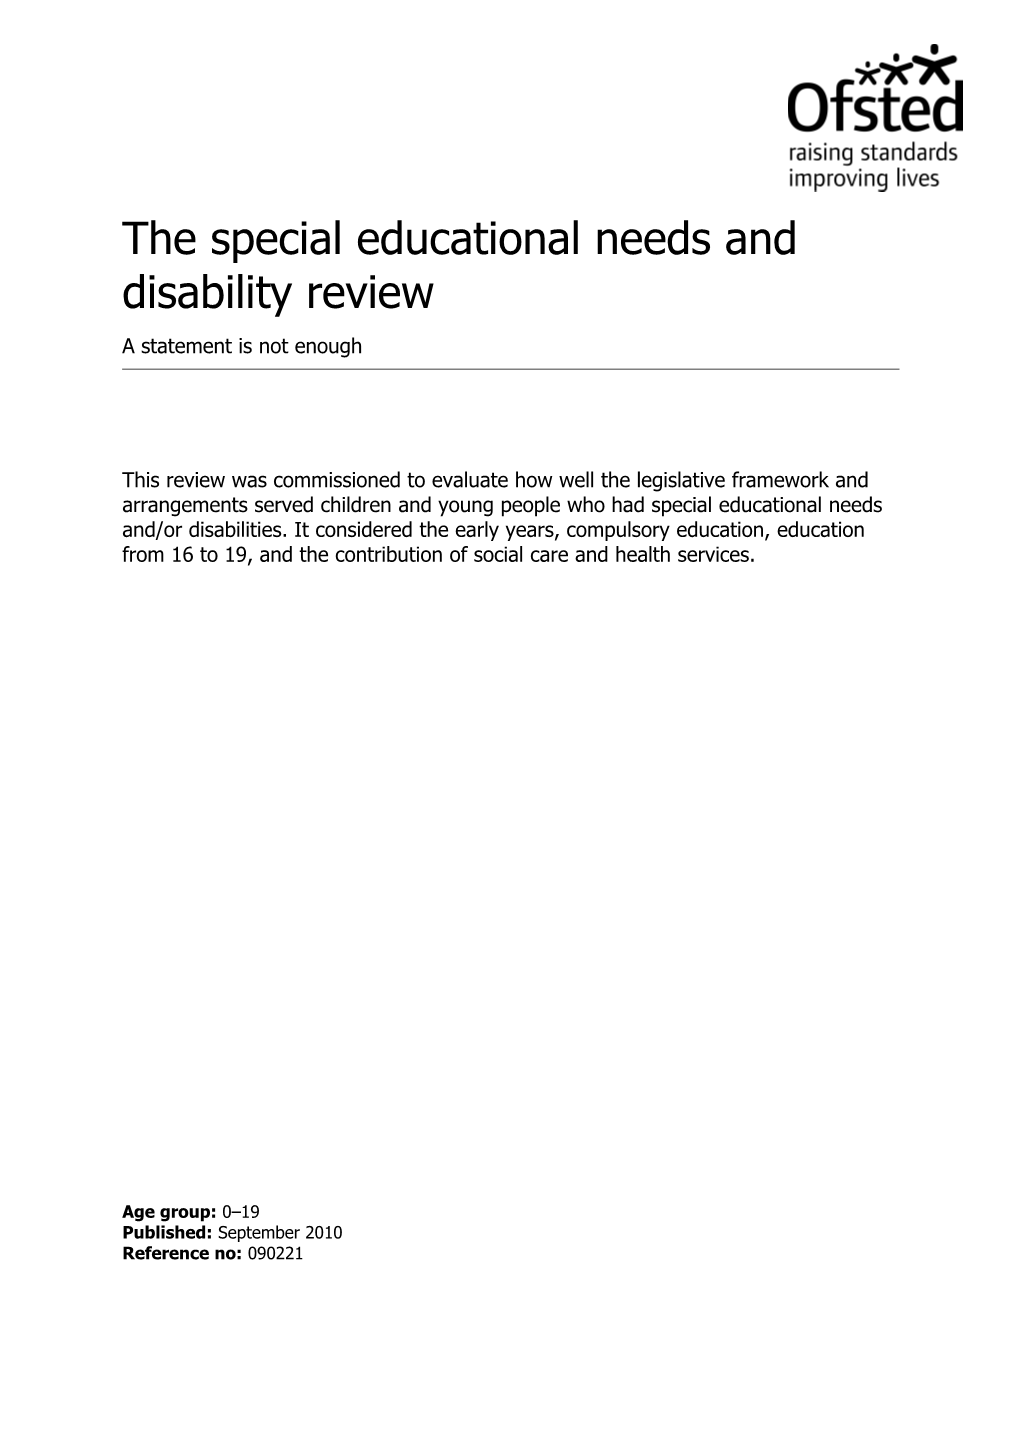 The Special Educational Needs and Disability Review